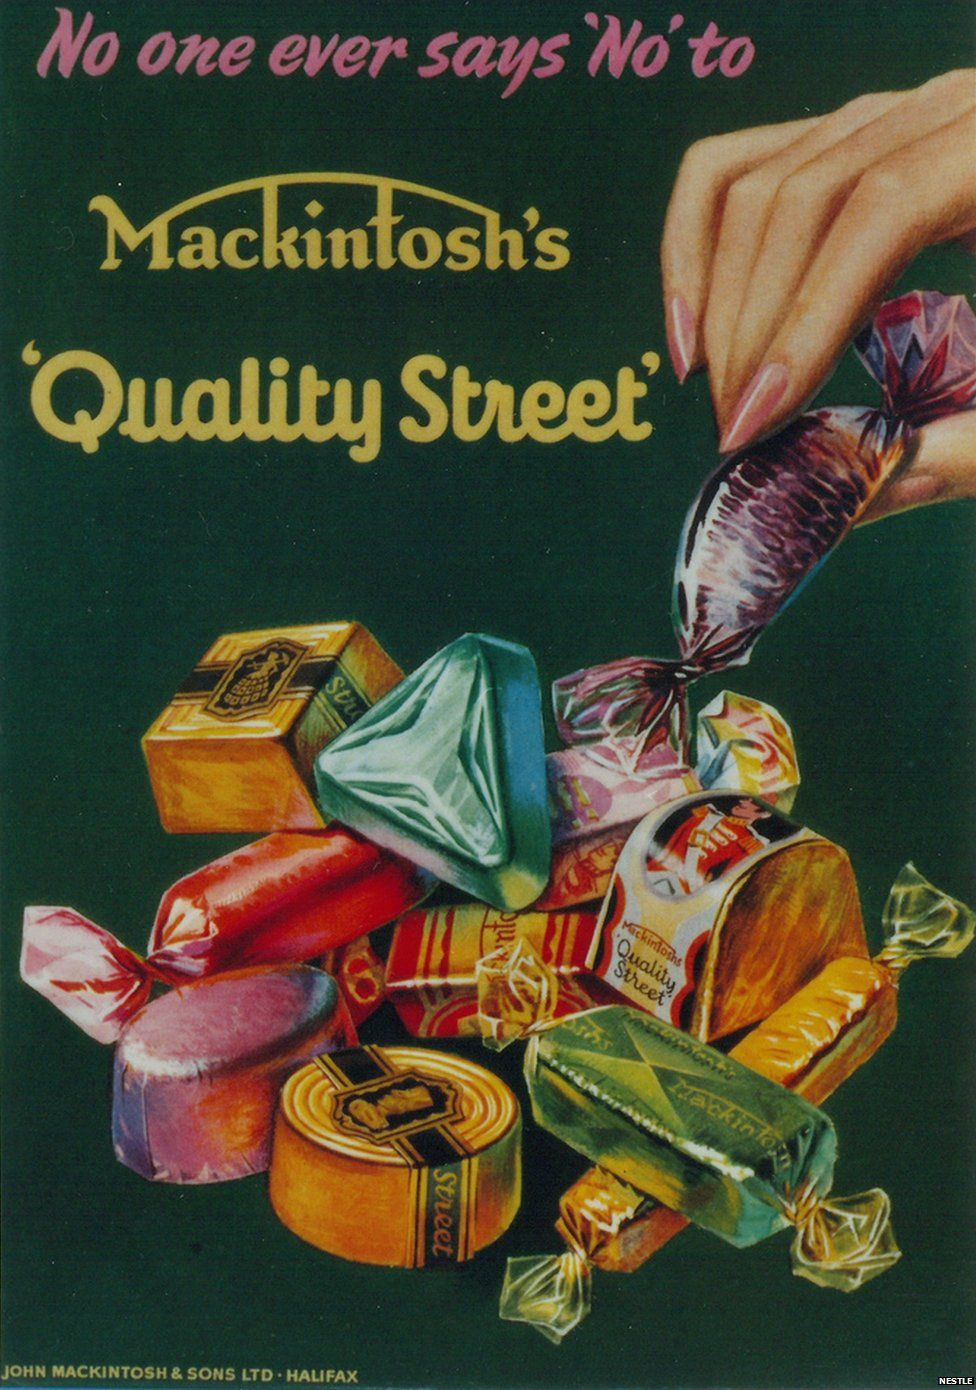 Quality Street poster